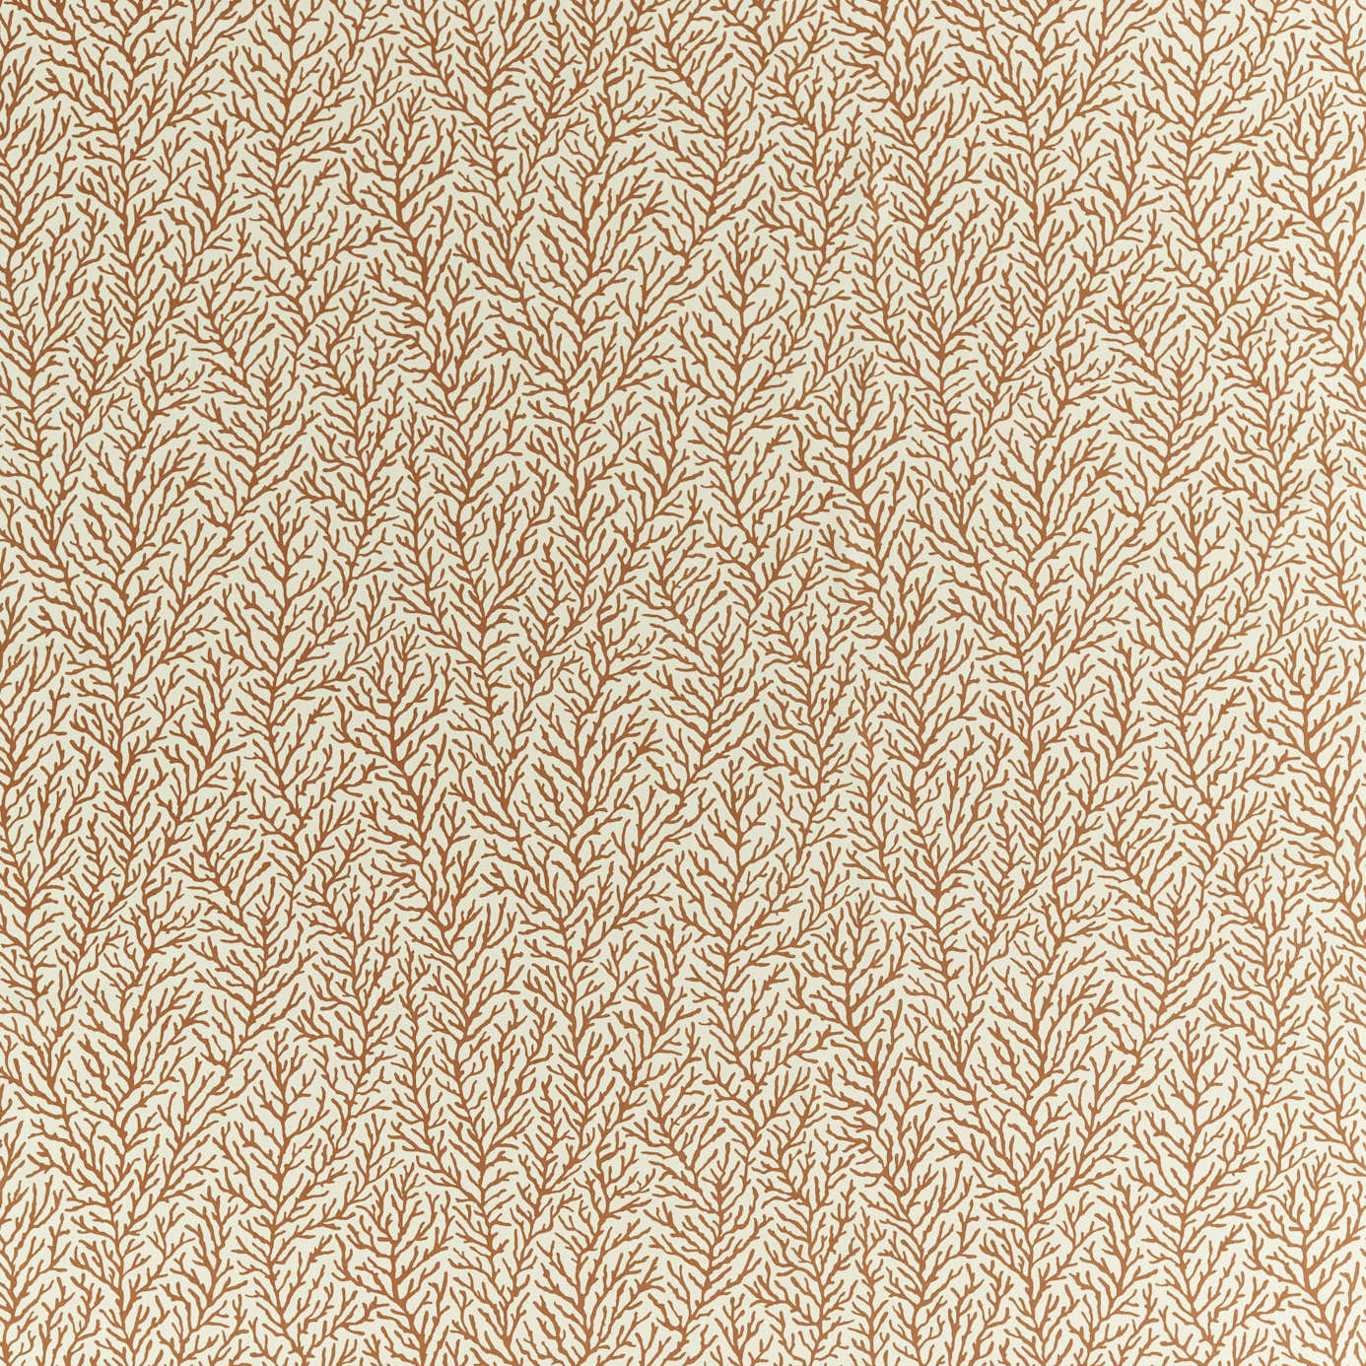 Atoll Fabric by Harlequin - HTEF121001 - Bronze/Sailcloth